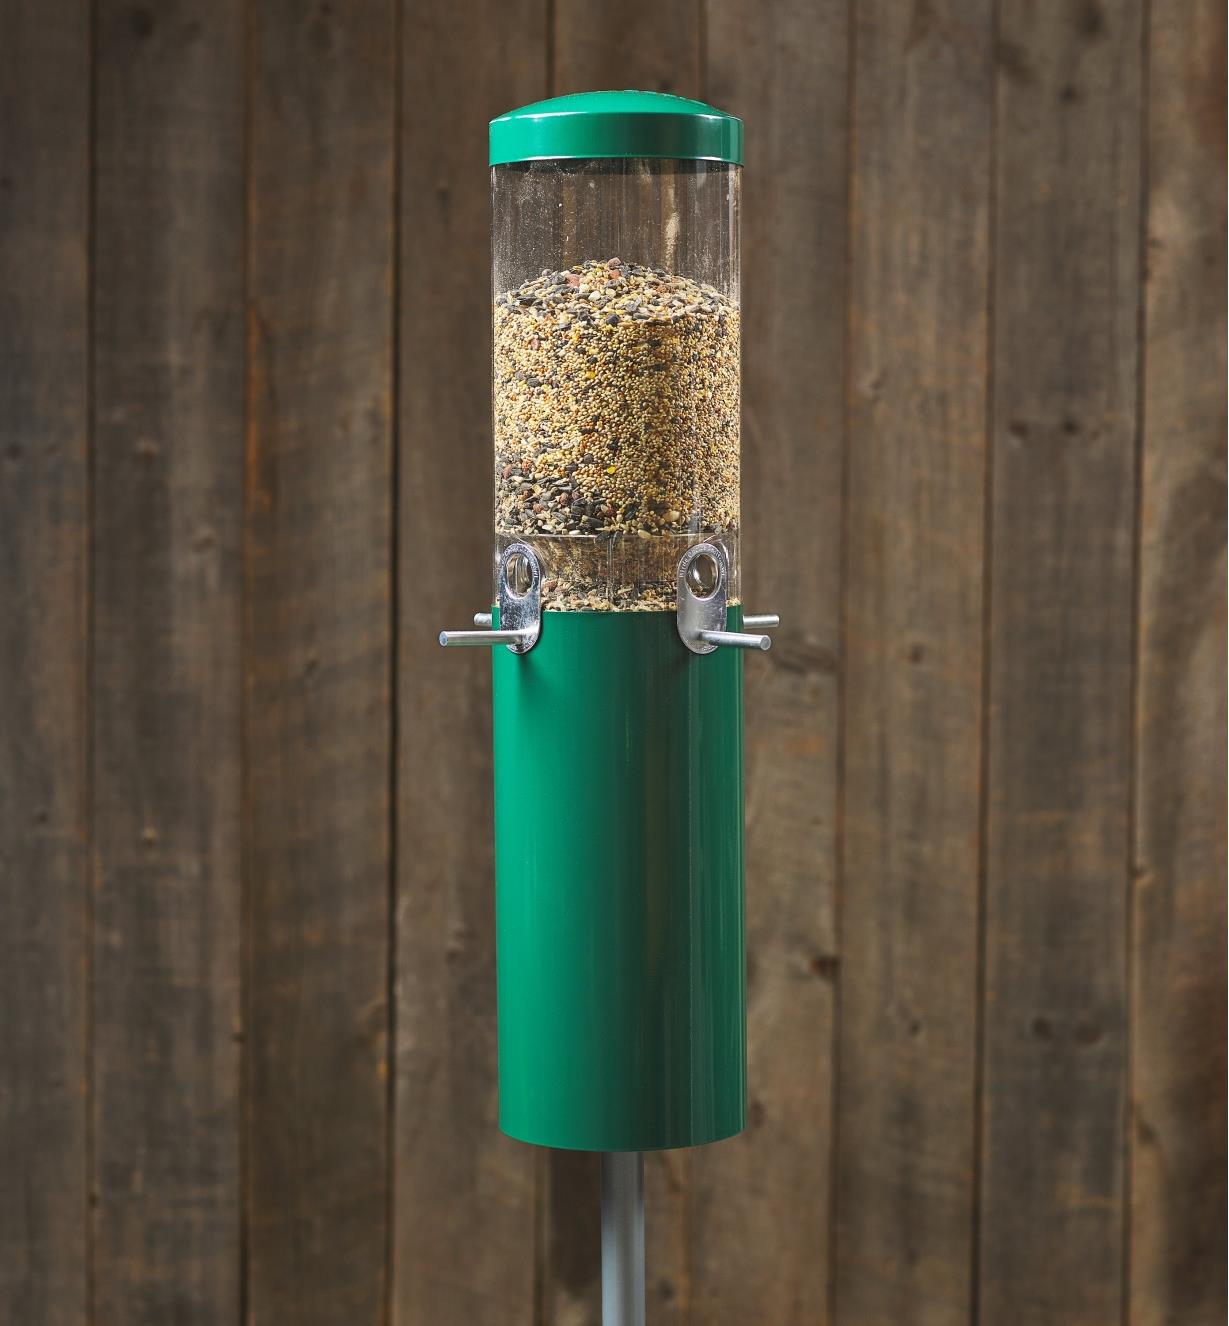 A pole-mounted squirrel-proof bird feeder installed and filled with bird seed